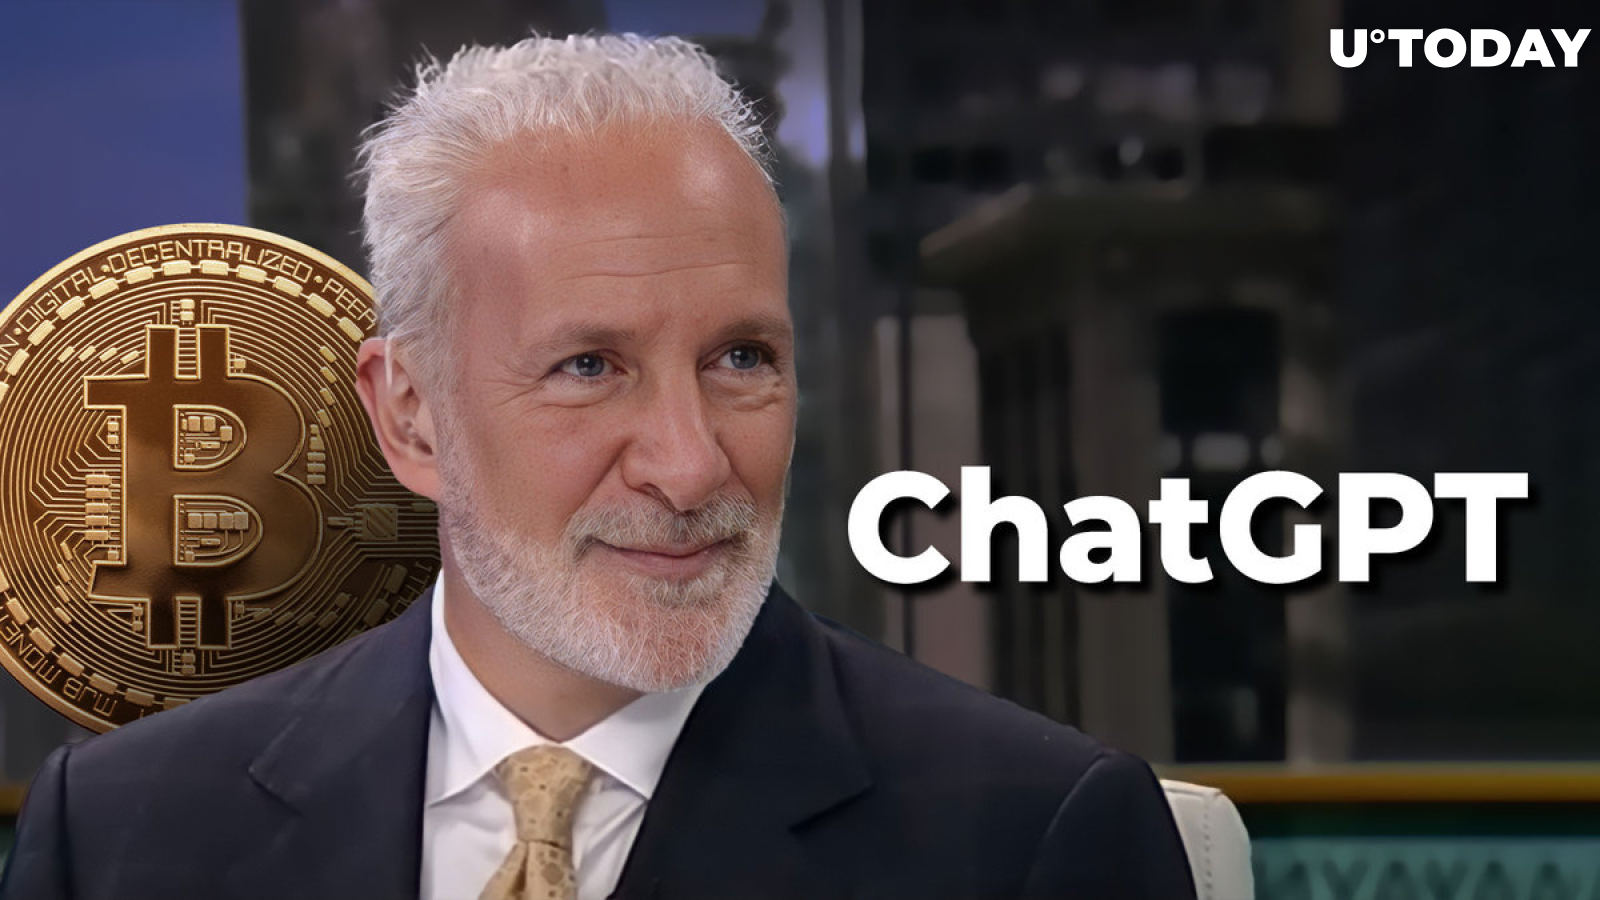 Peter Schiff Says ChatGPT Intelligent for Not Recommending Bitcoin (BTC) Investment